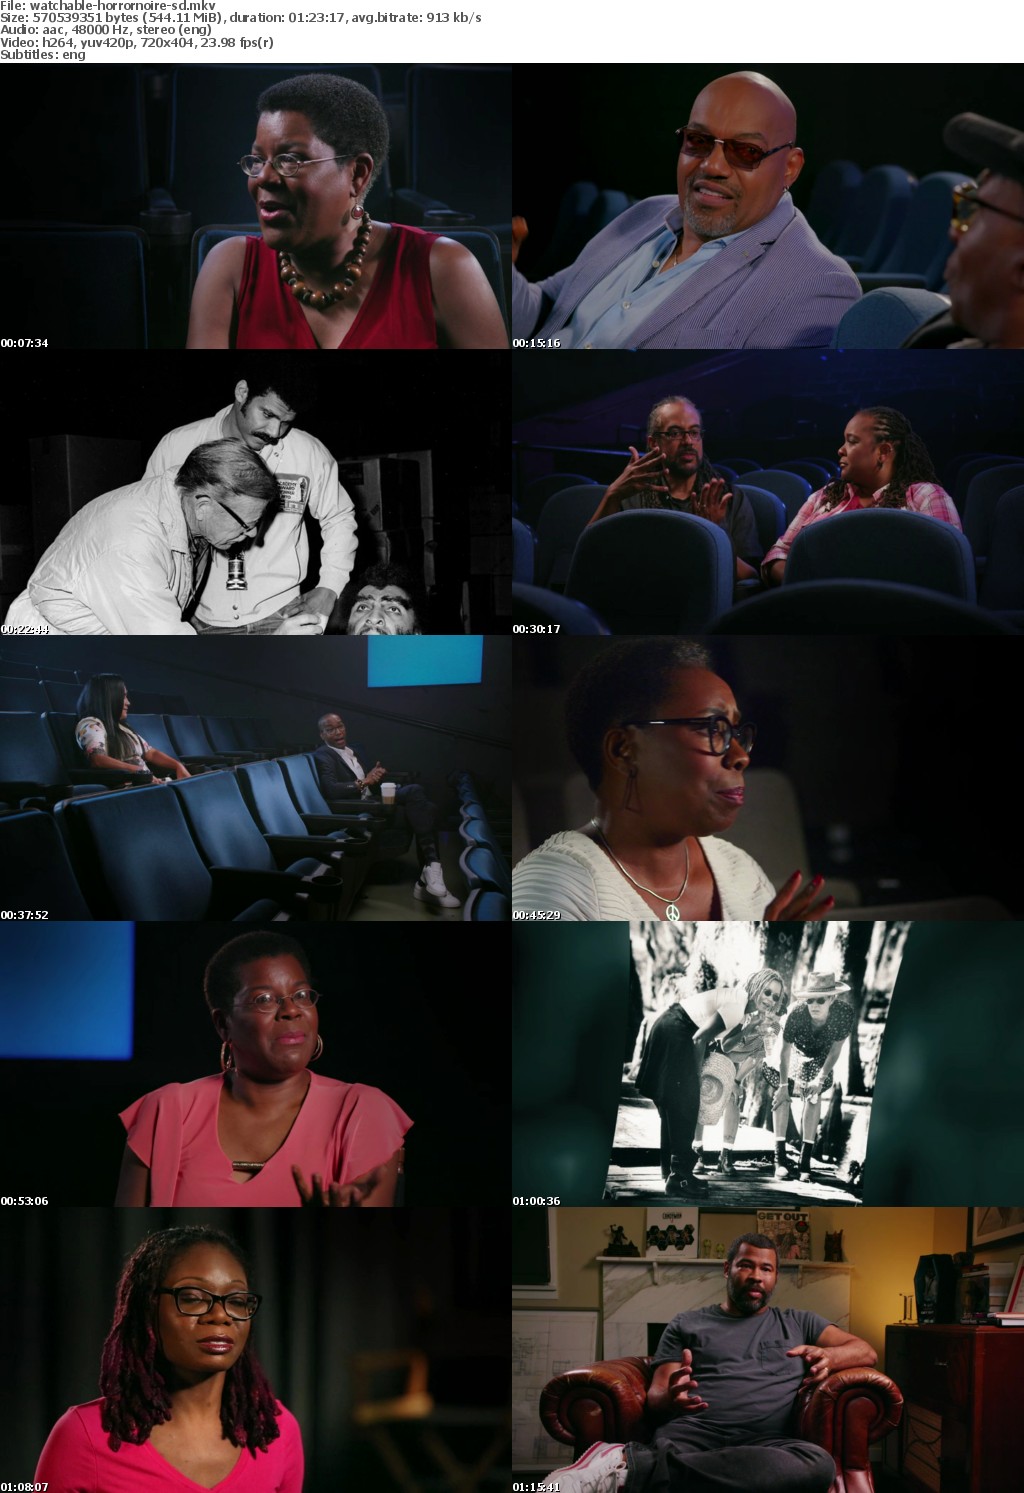 Horror Noire A History Of Black Horror 2019 BDRIP X264-WATCHABLE